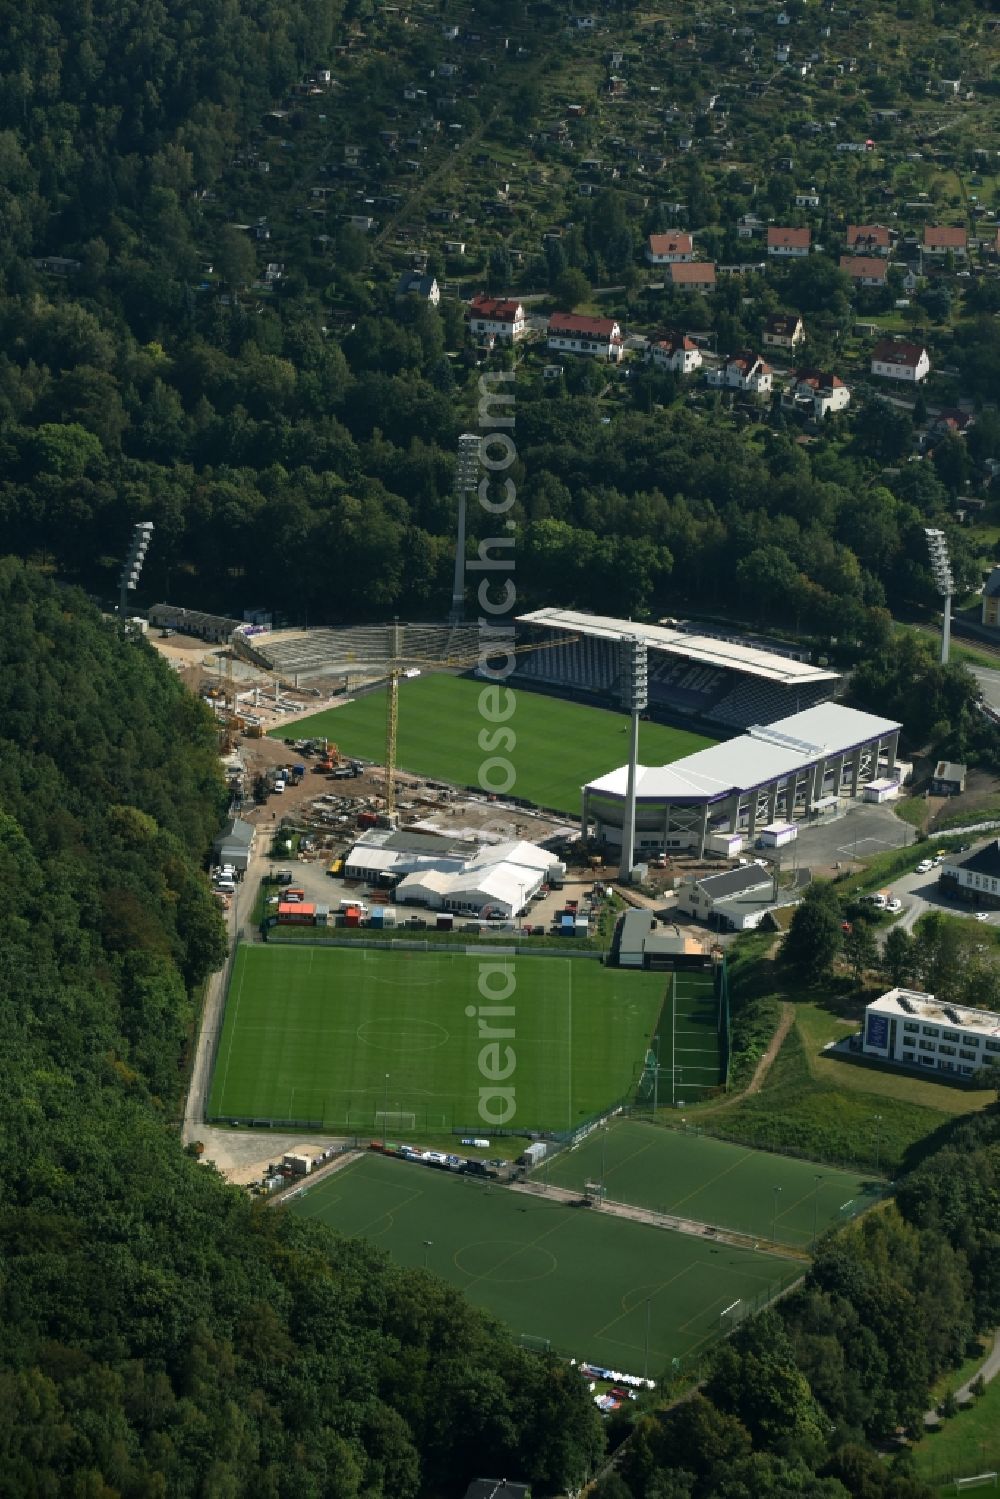 Aue from the bird's eye view: Construction site to redevelop the football stadium Sparkassen-Erzgebirgsstadion of FC Erzgebirge Aue in Aue in the state of Saxony. Parts of the stadium are being demolished, refurbished and new stands are being built